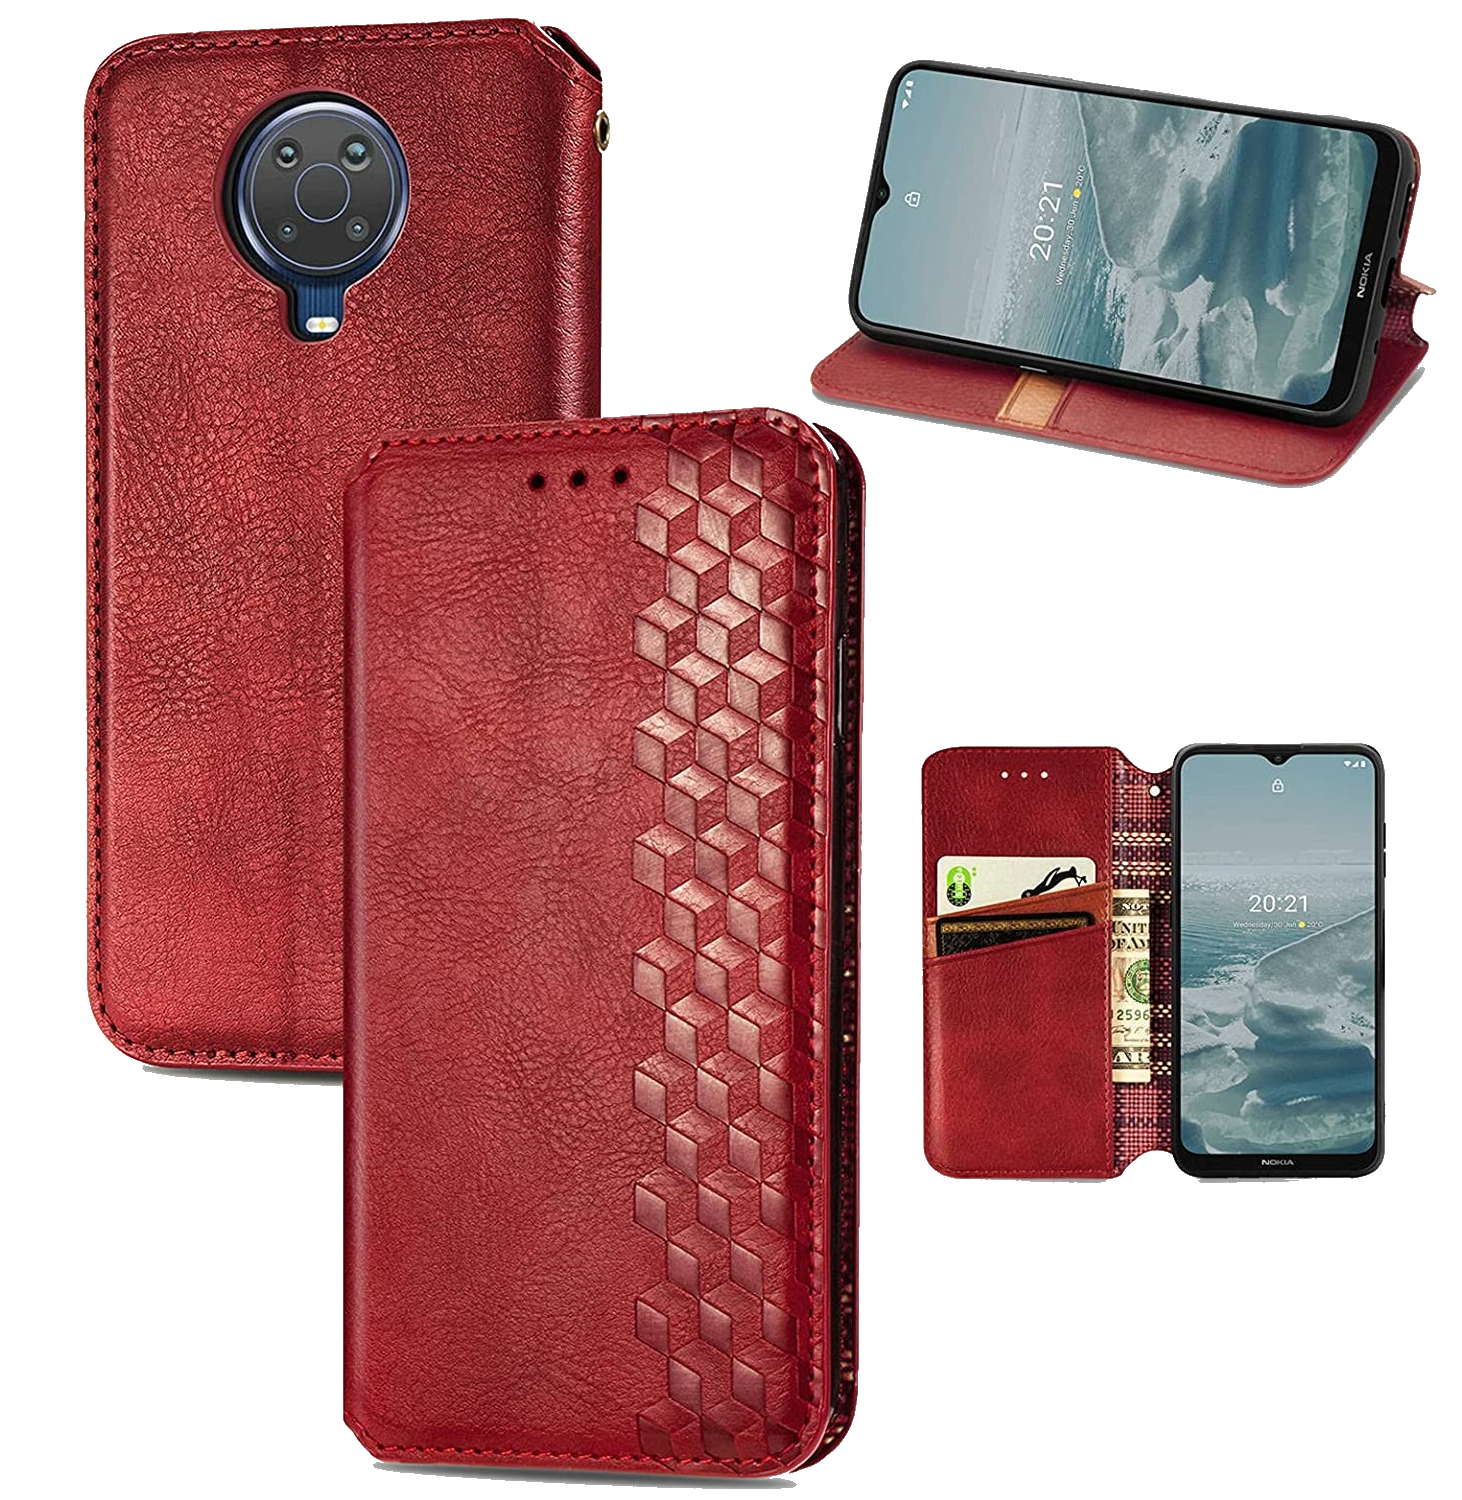 Damondy Magnetic Folio Leather Wallet Cover Nokia G10 G20 Reco